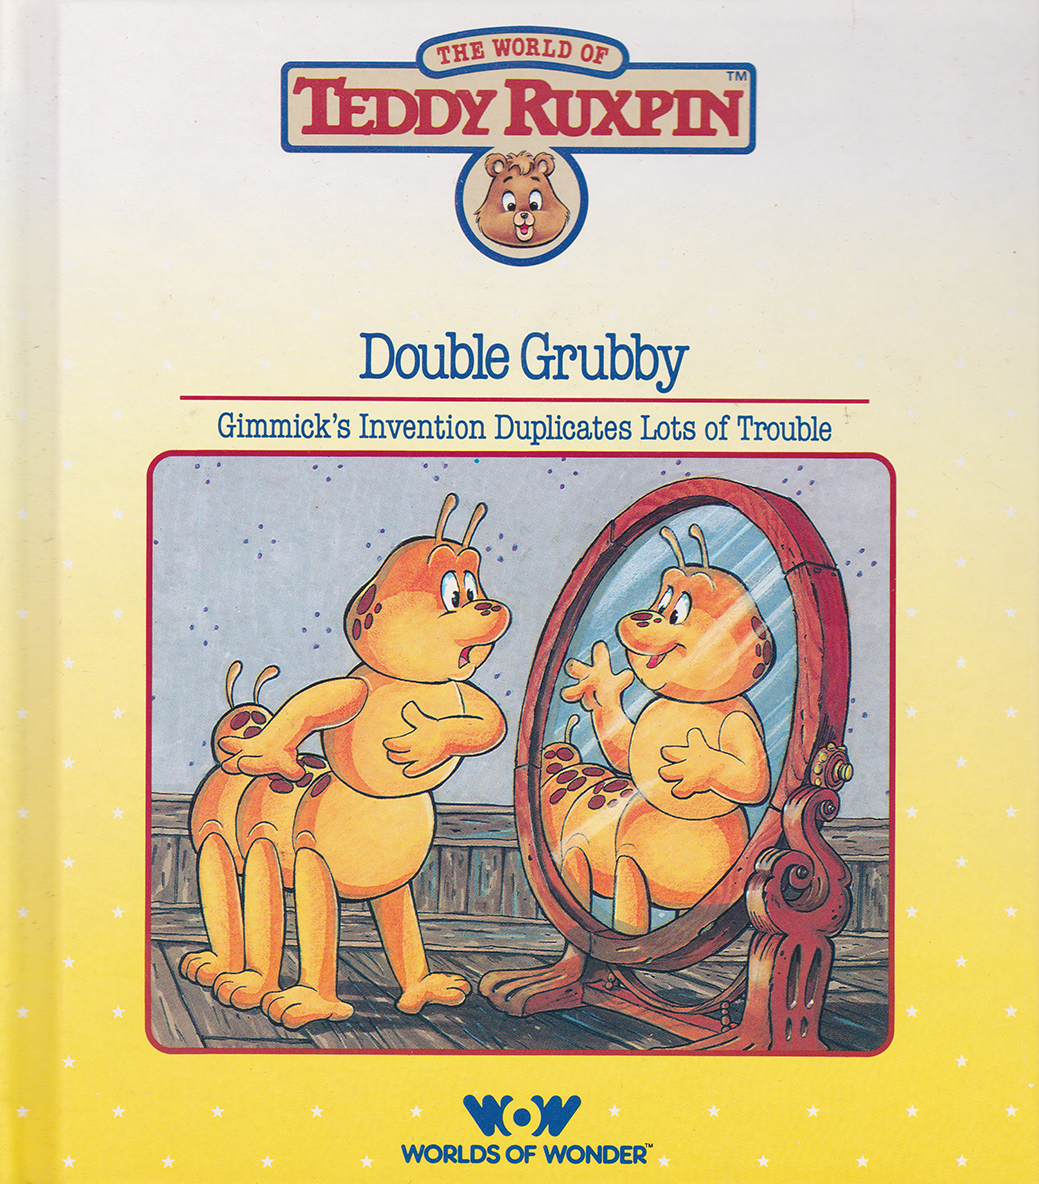 teddy ruxpin and grubby collection